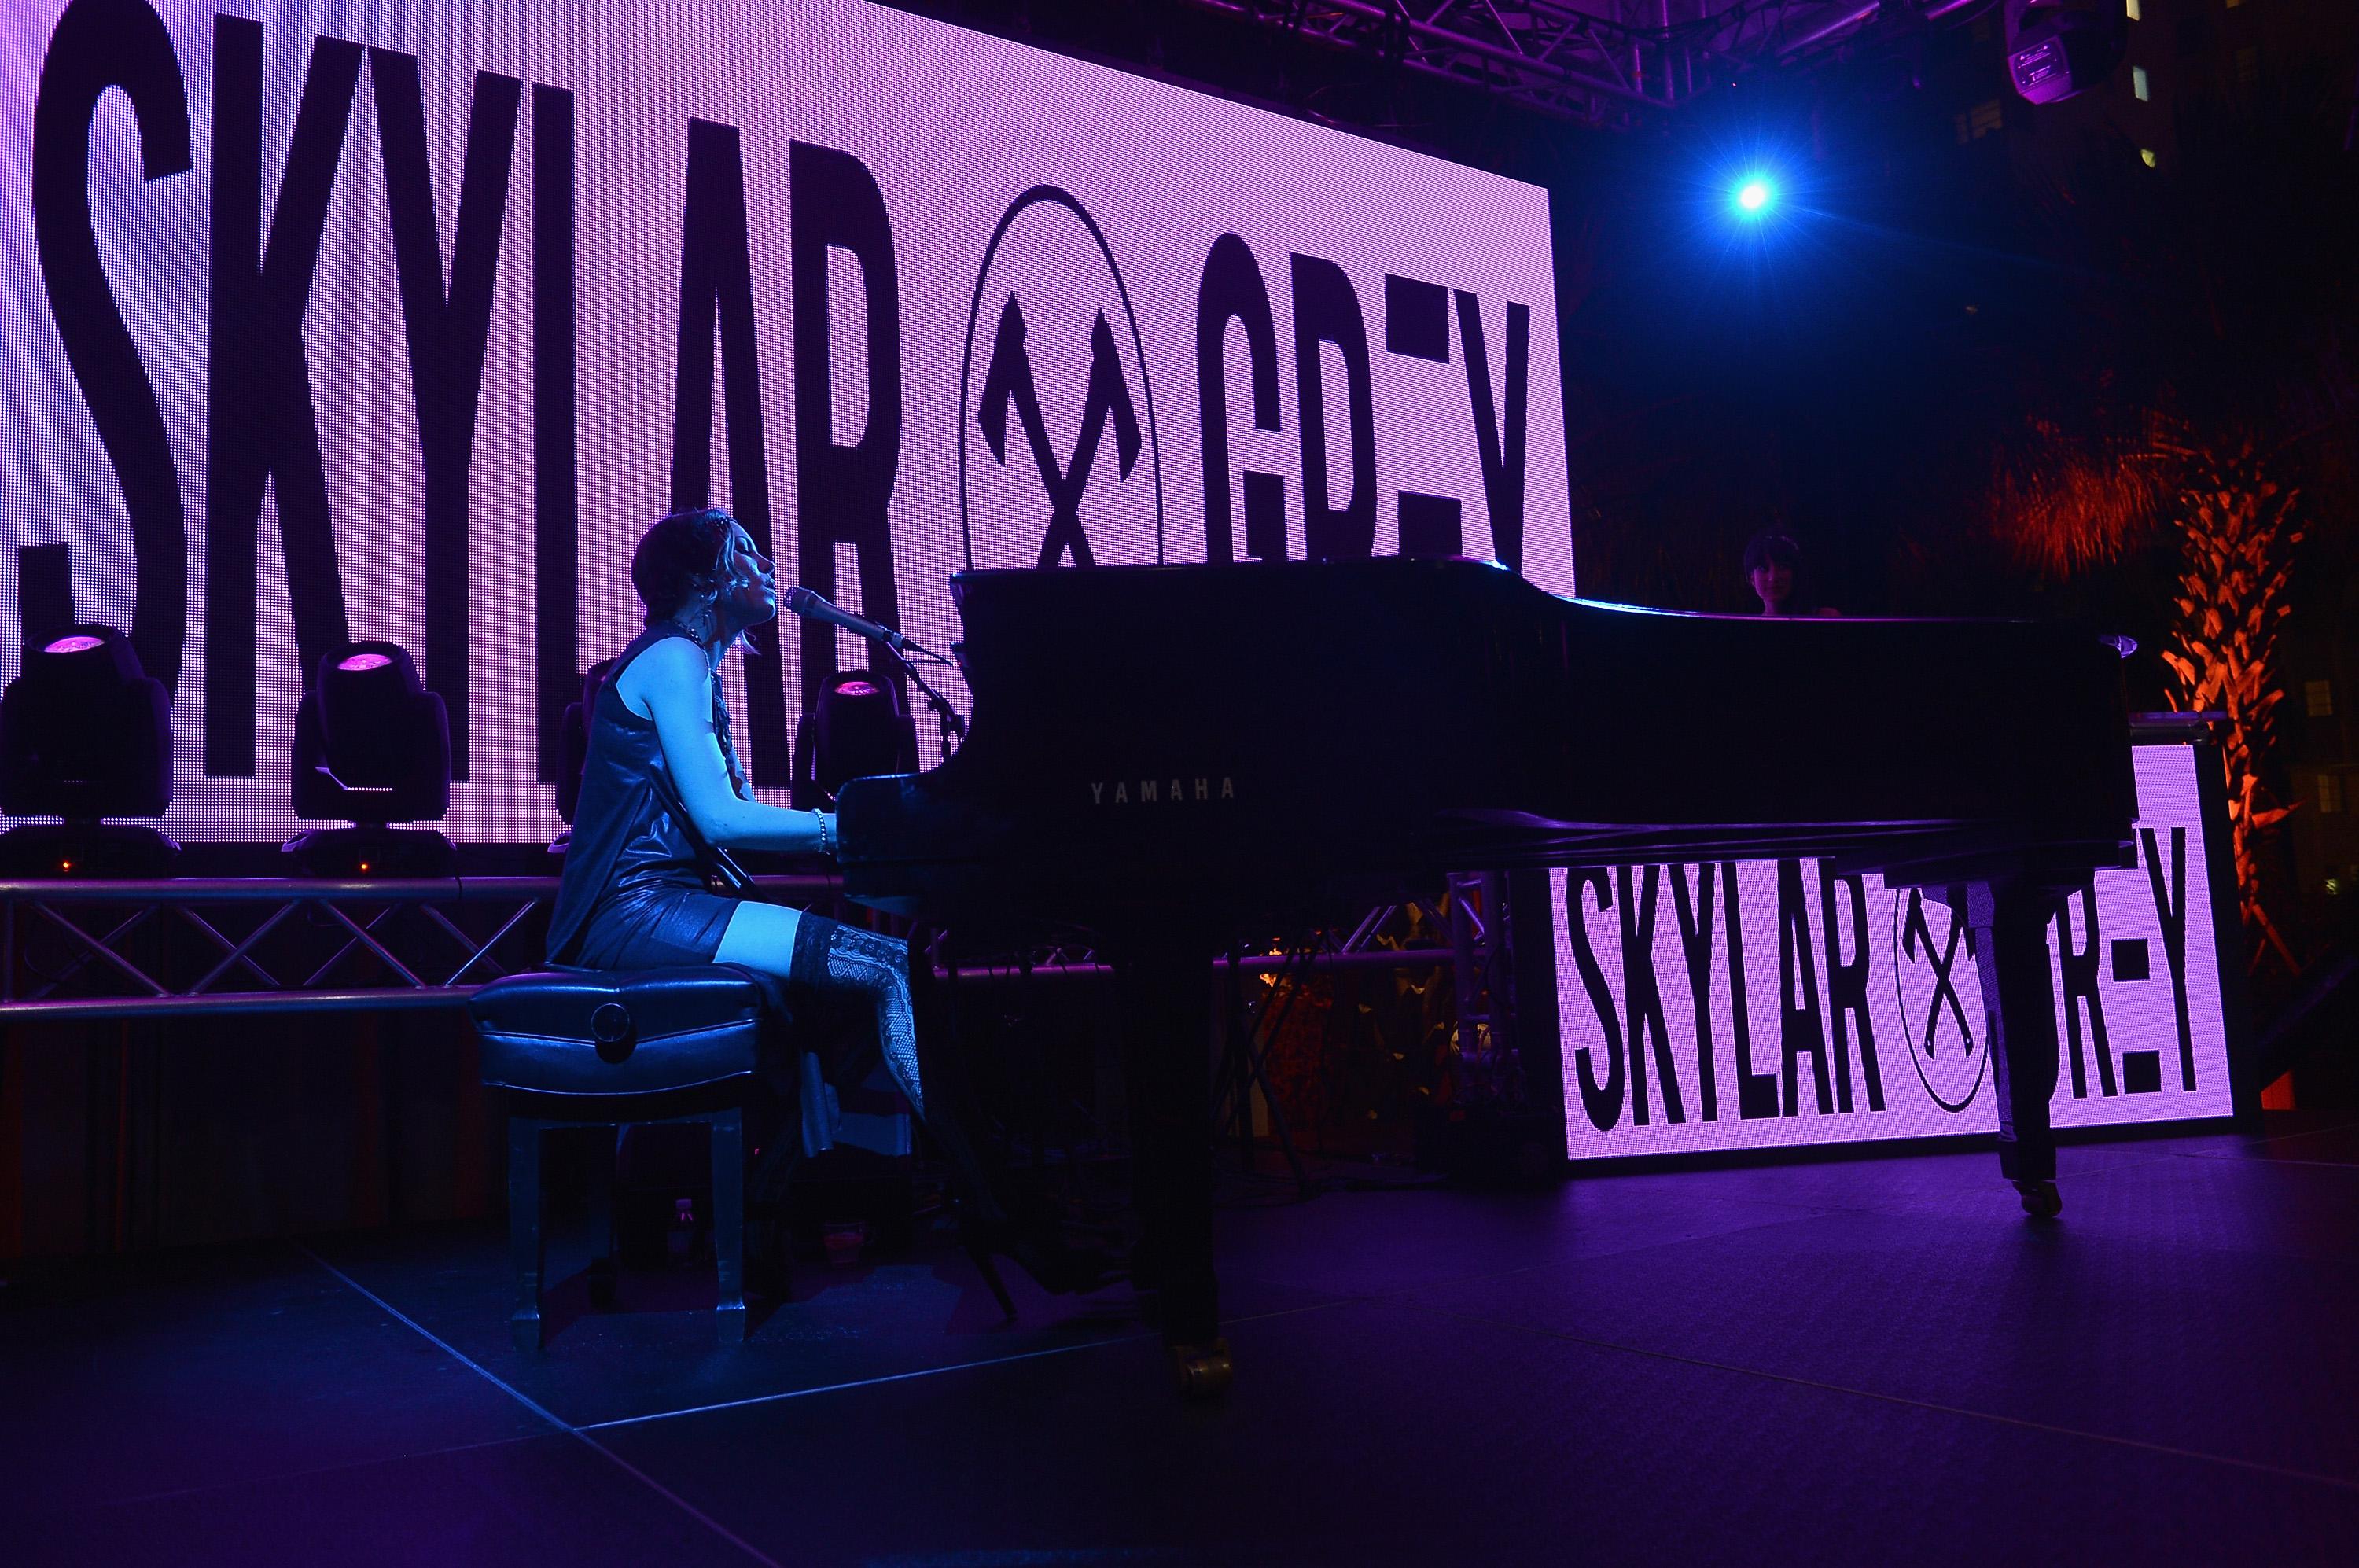 Belvedere Vodka And SLS Hotel South Beach Host New Year's Eve Party With Robin Thicke And Skyler Grey